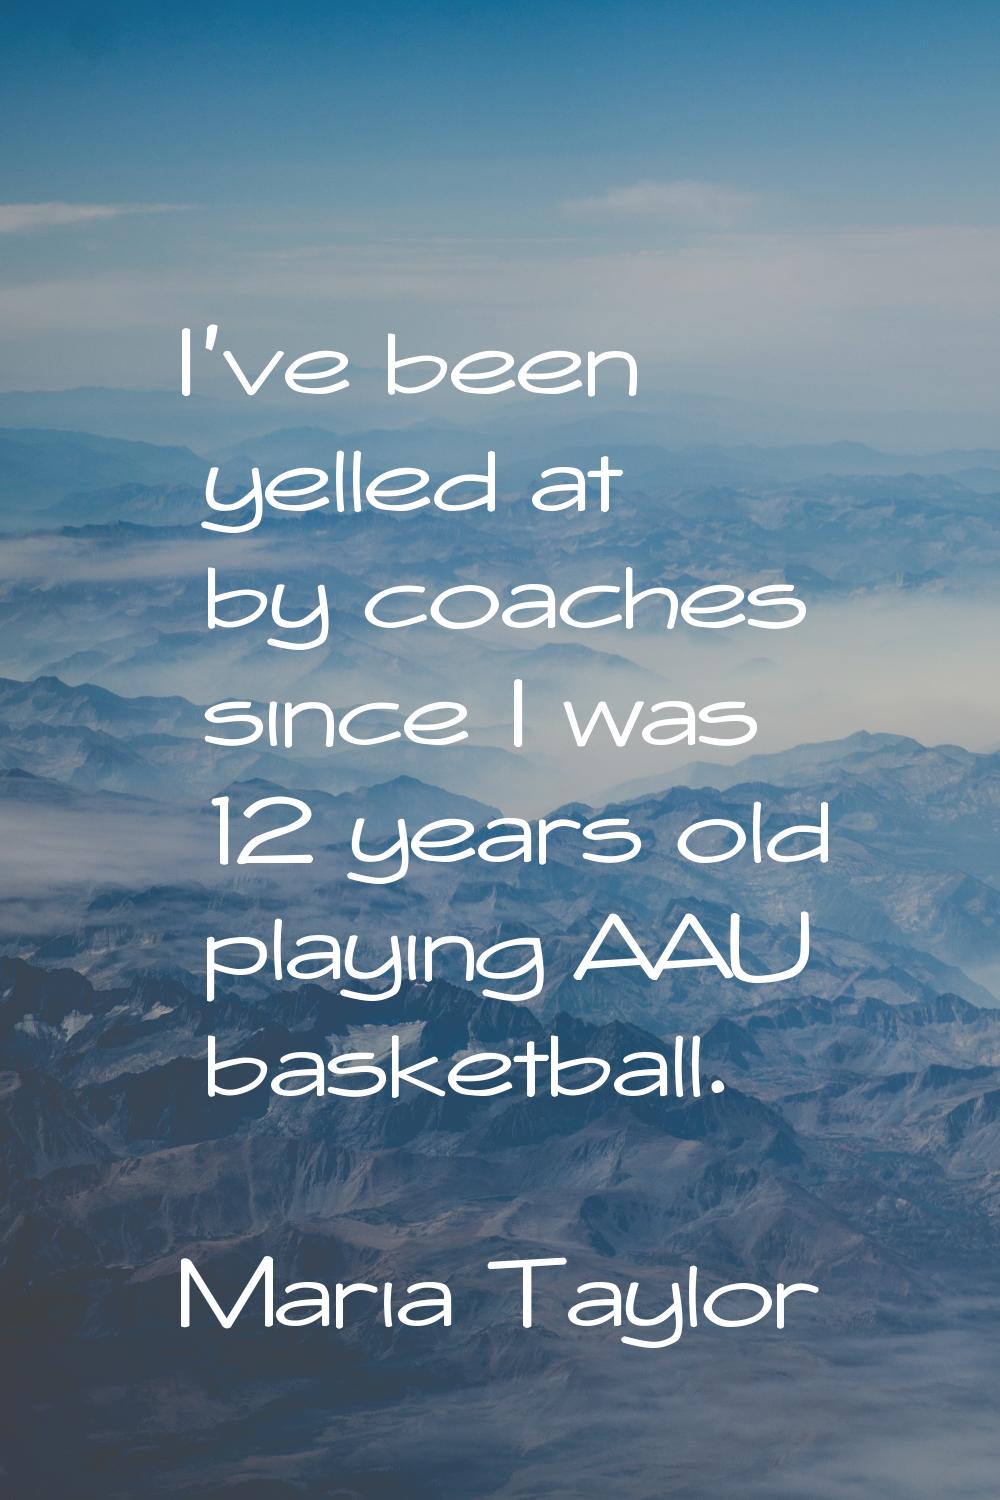 I've been yelled at by coaches since I was 12 years old playing AAU basketball.